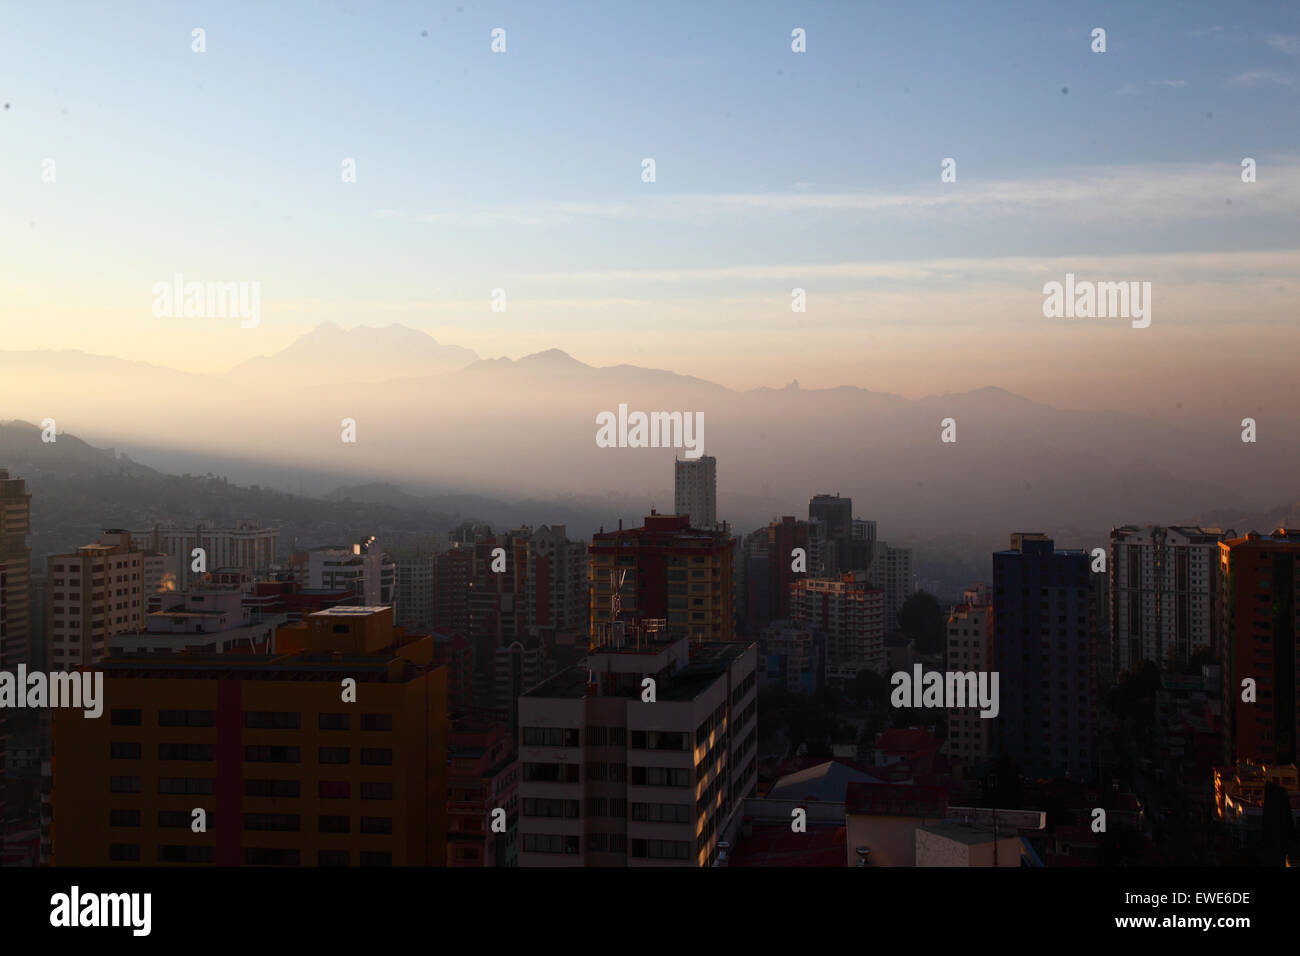 La Paz, Bolivia, 24th June 2015. Smoke fills the valleys of the lower part of La Paz shortly after sunrise after San Juan night. San Juan is traditionally believed to be the coldest part of the year and many people in Bolivia light bonfires and set off fireworks. Local authorities have been attempting to stop this custom in the last few years to reduce the extra pollution it causes in the city, but with only limited success. The peak in the background is the 6439m high Mt Illimani. Stock Photo